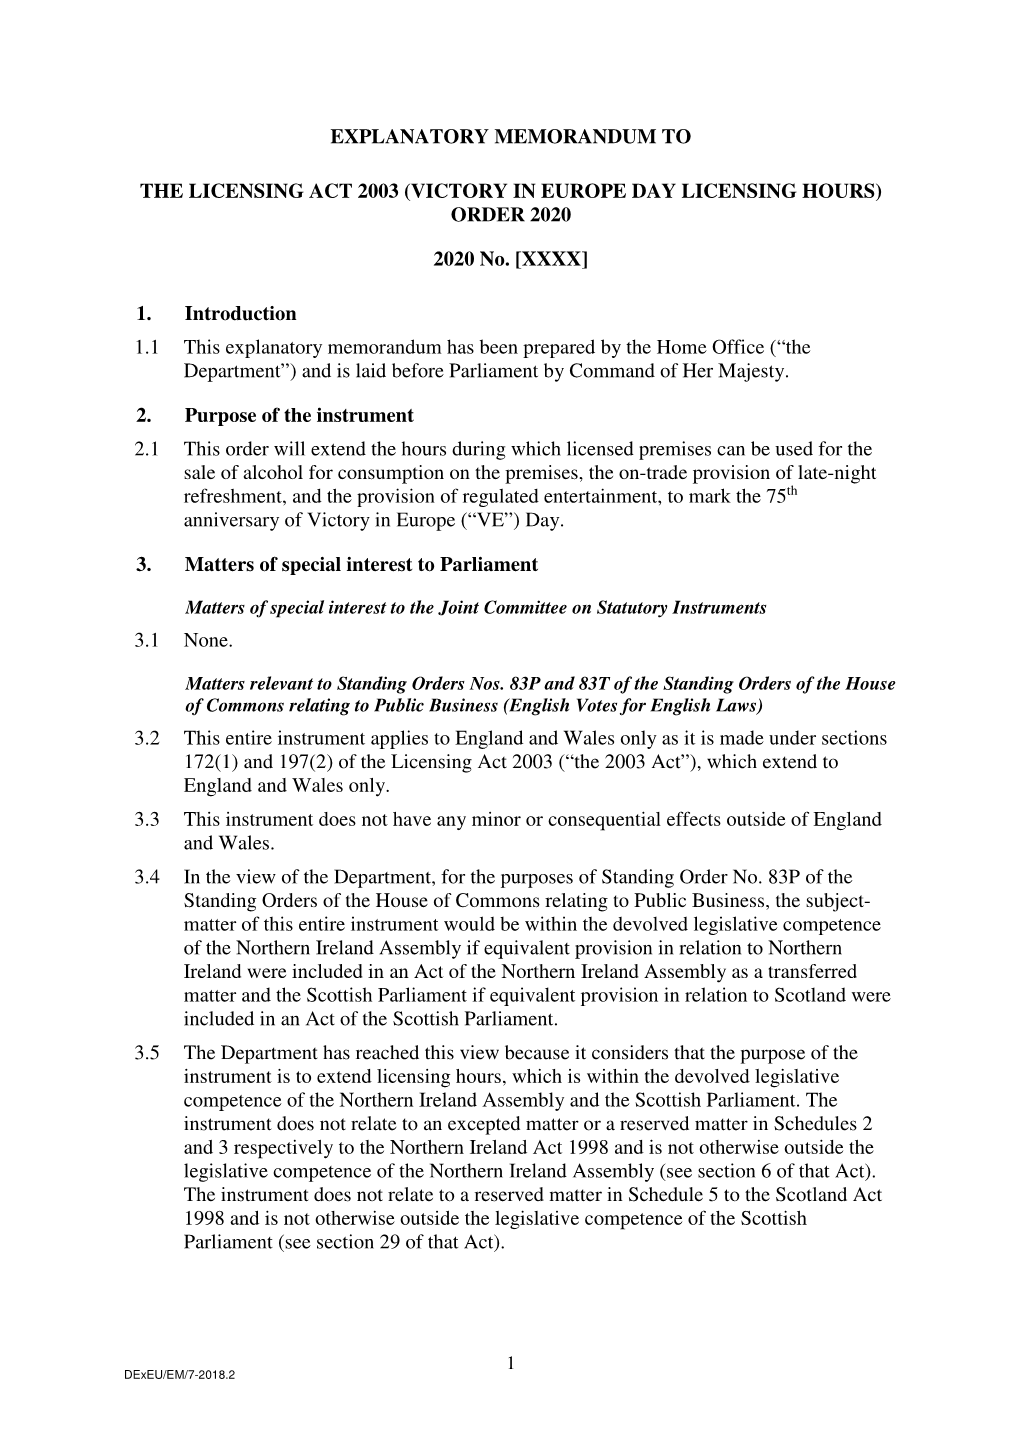 The Licensing Act 2003 (Victory in Europe Day Licensing Hours) Order 2020